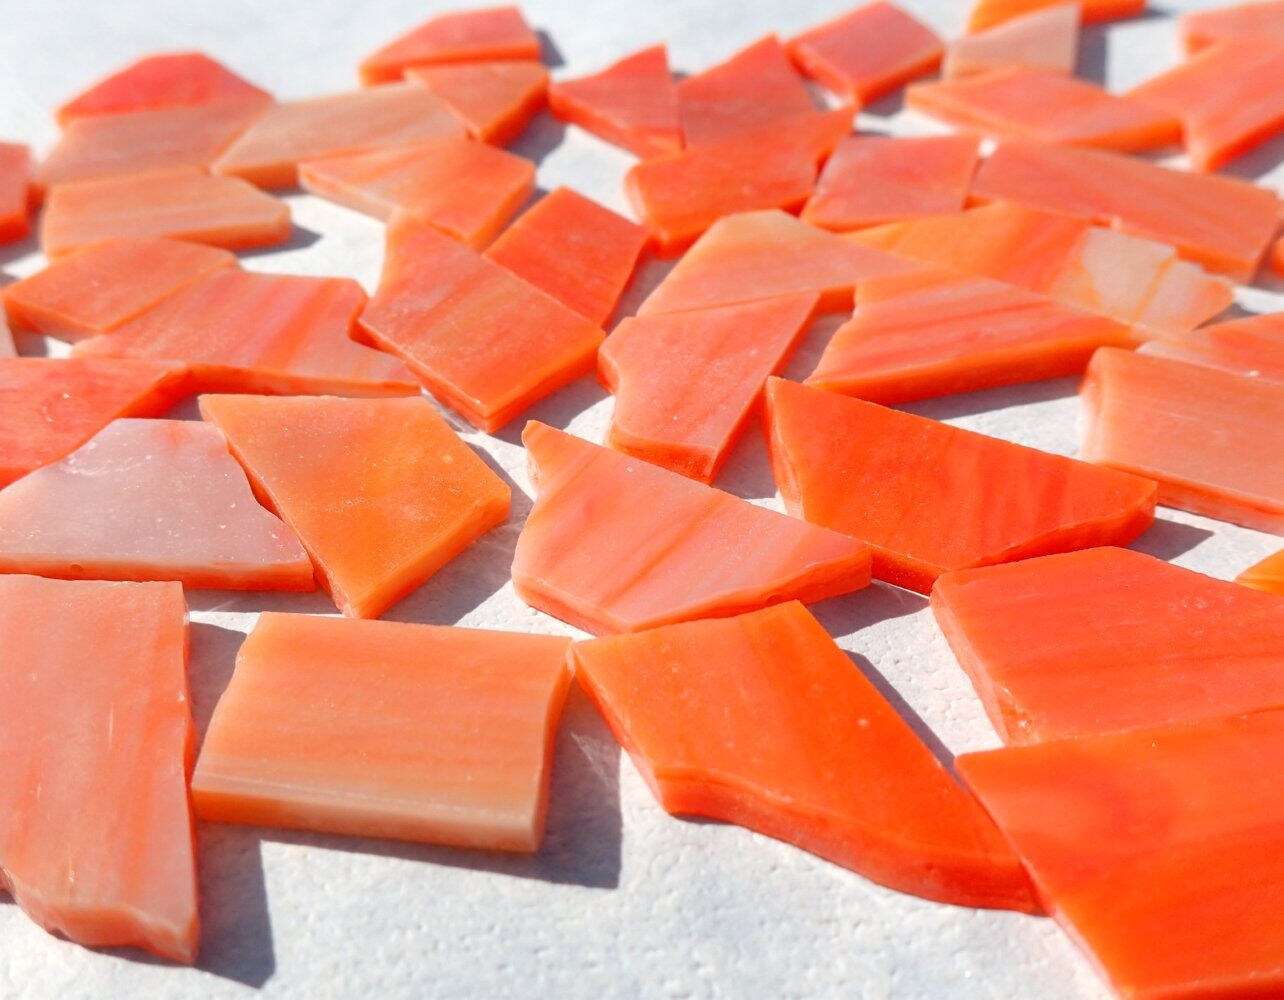 Stained Glass Mosaic Tiles in Orange Creamsicle - 1/2 Pound - 5-15 mm Various Shapes